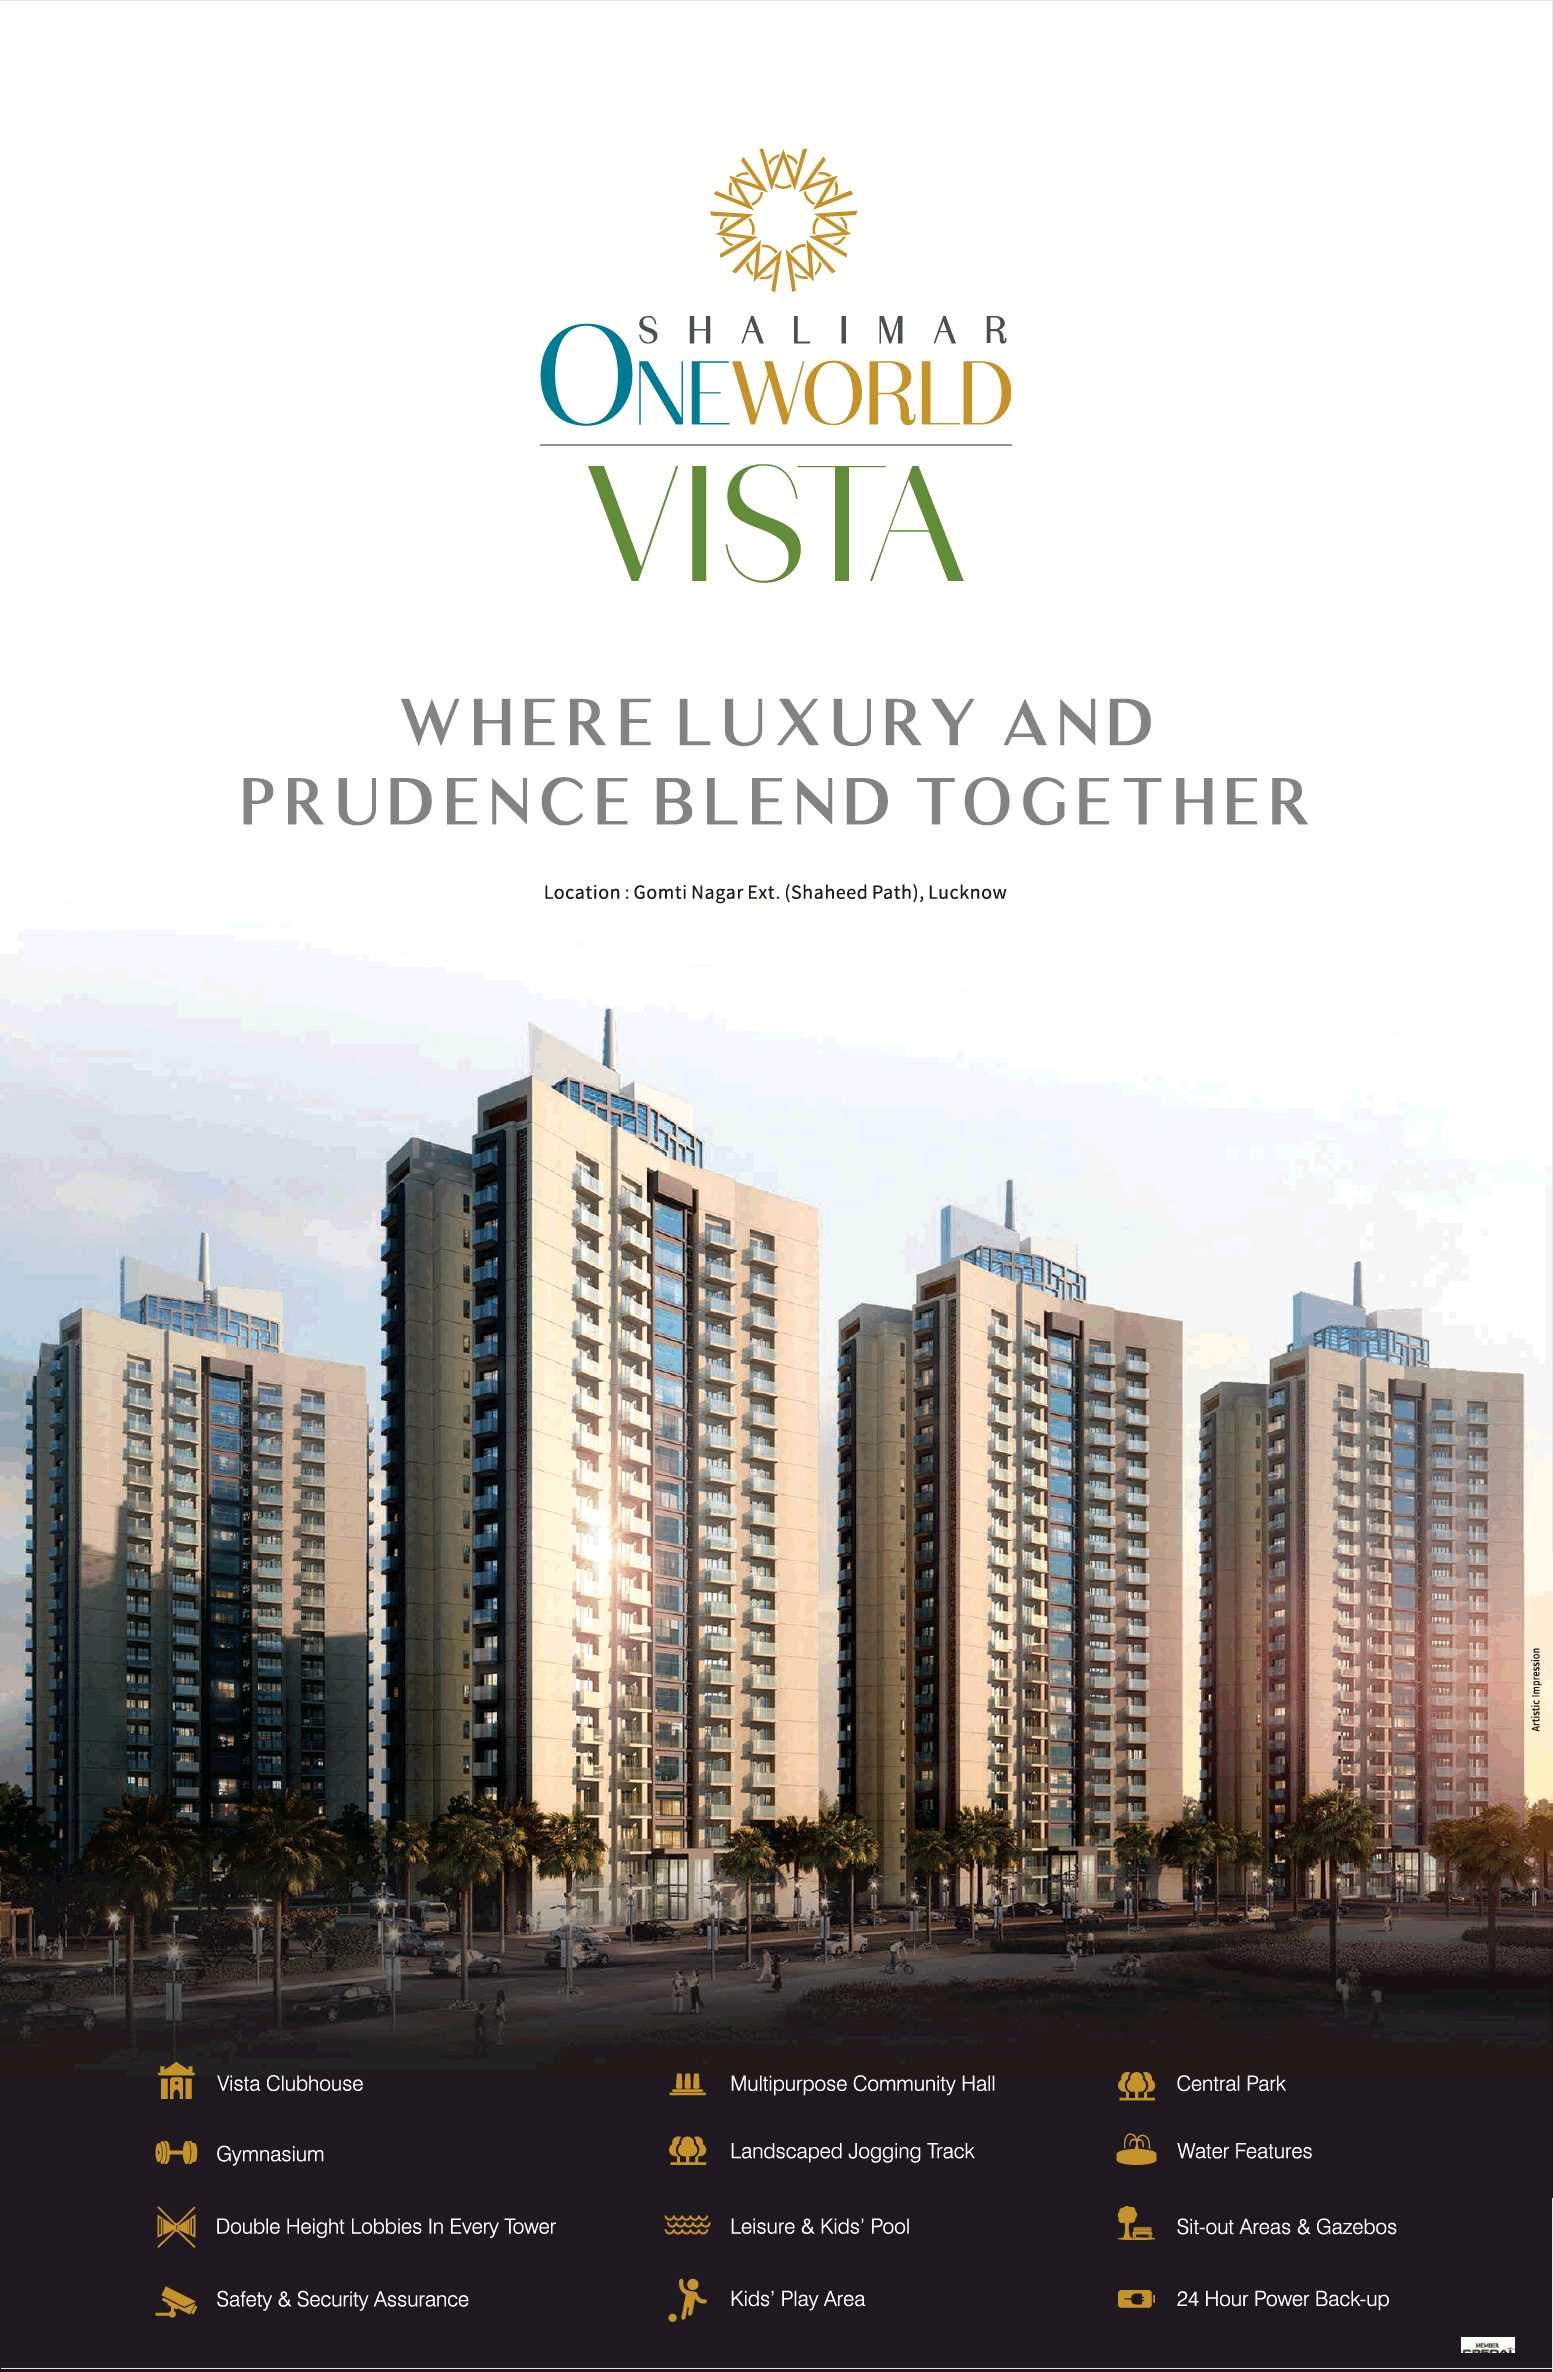 Experience luxury & prudence blend together at Shalimar One World Vista in Lucknow